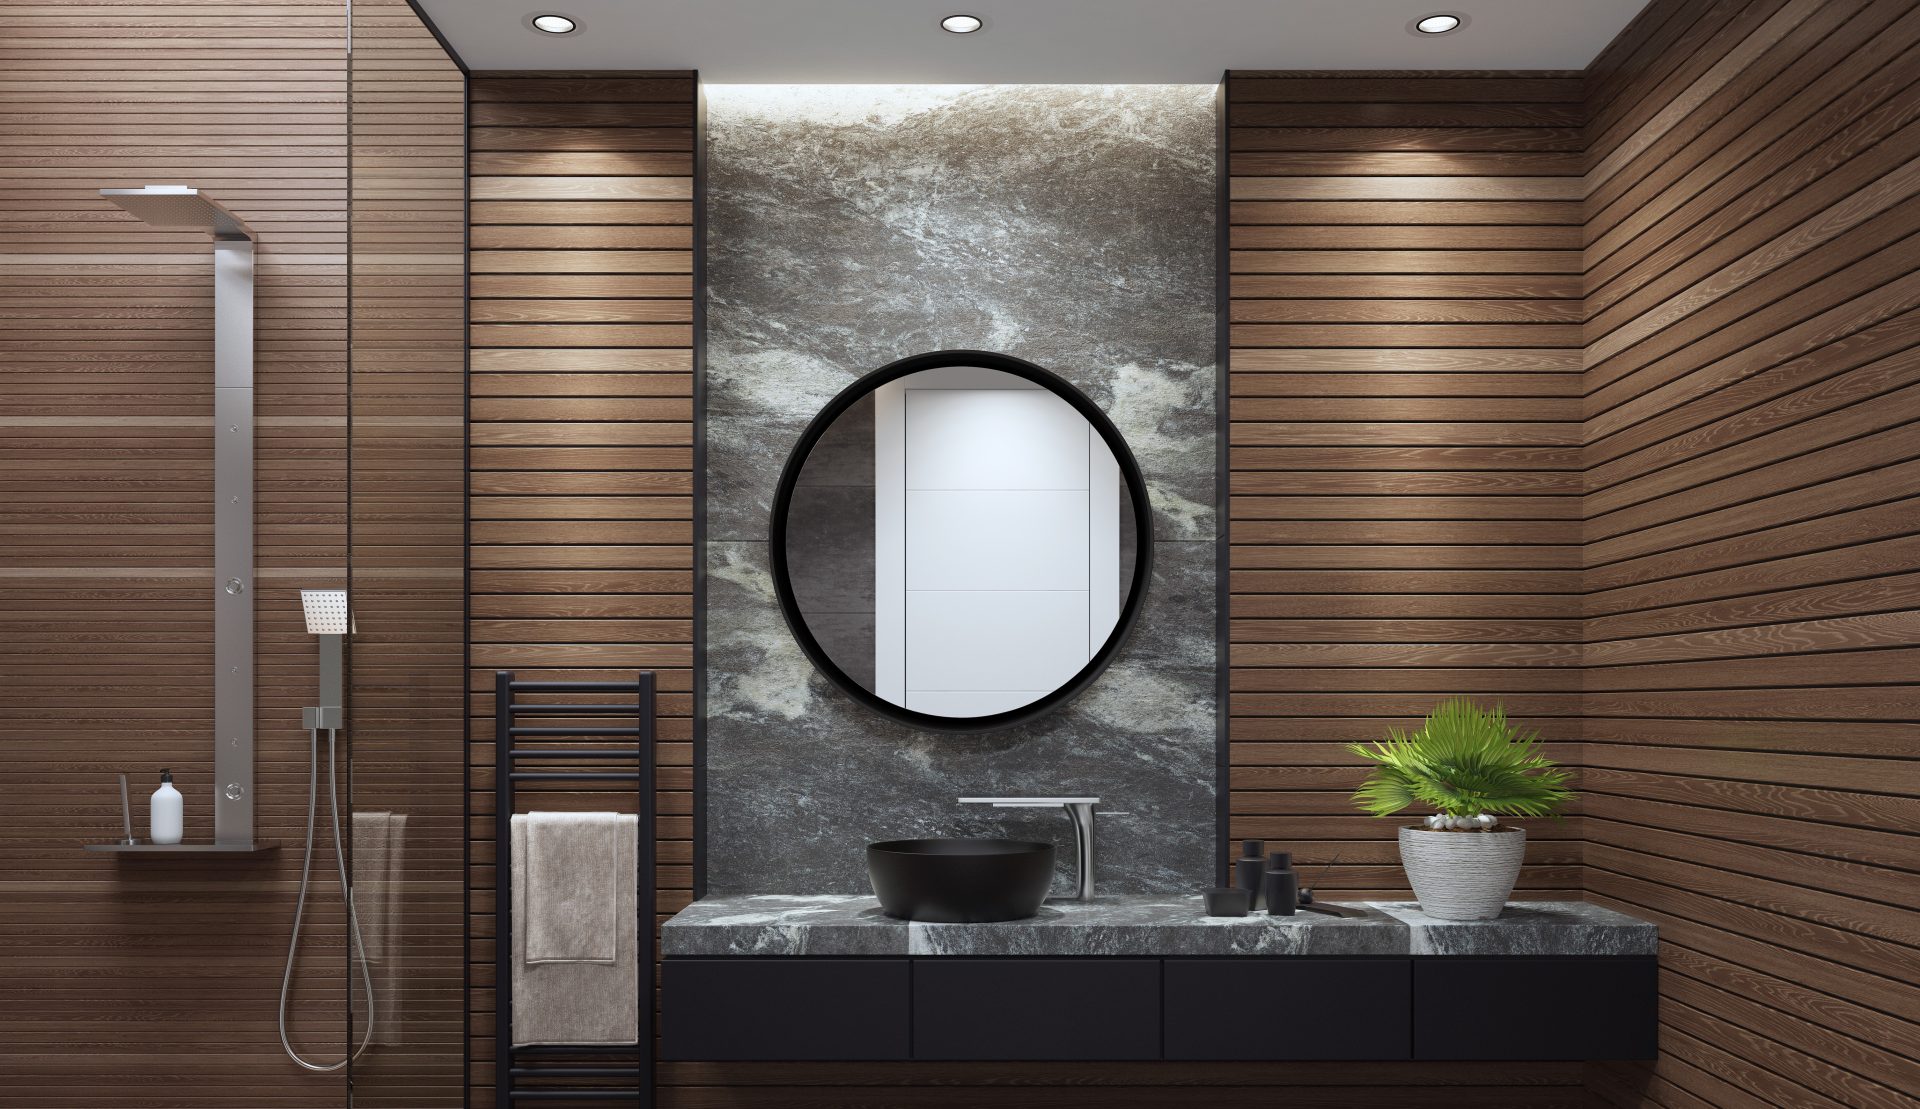 modern bathroom vanity unit in front of wood panel walls and a potted plant to the side